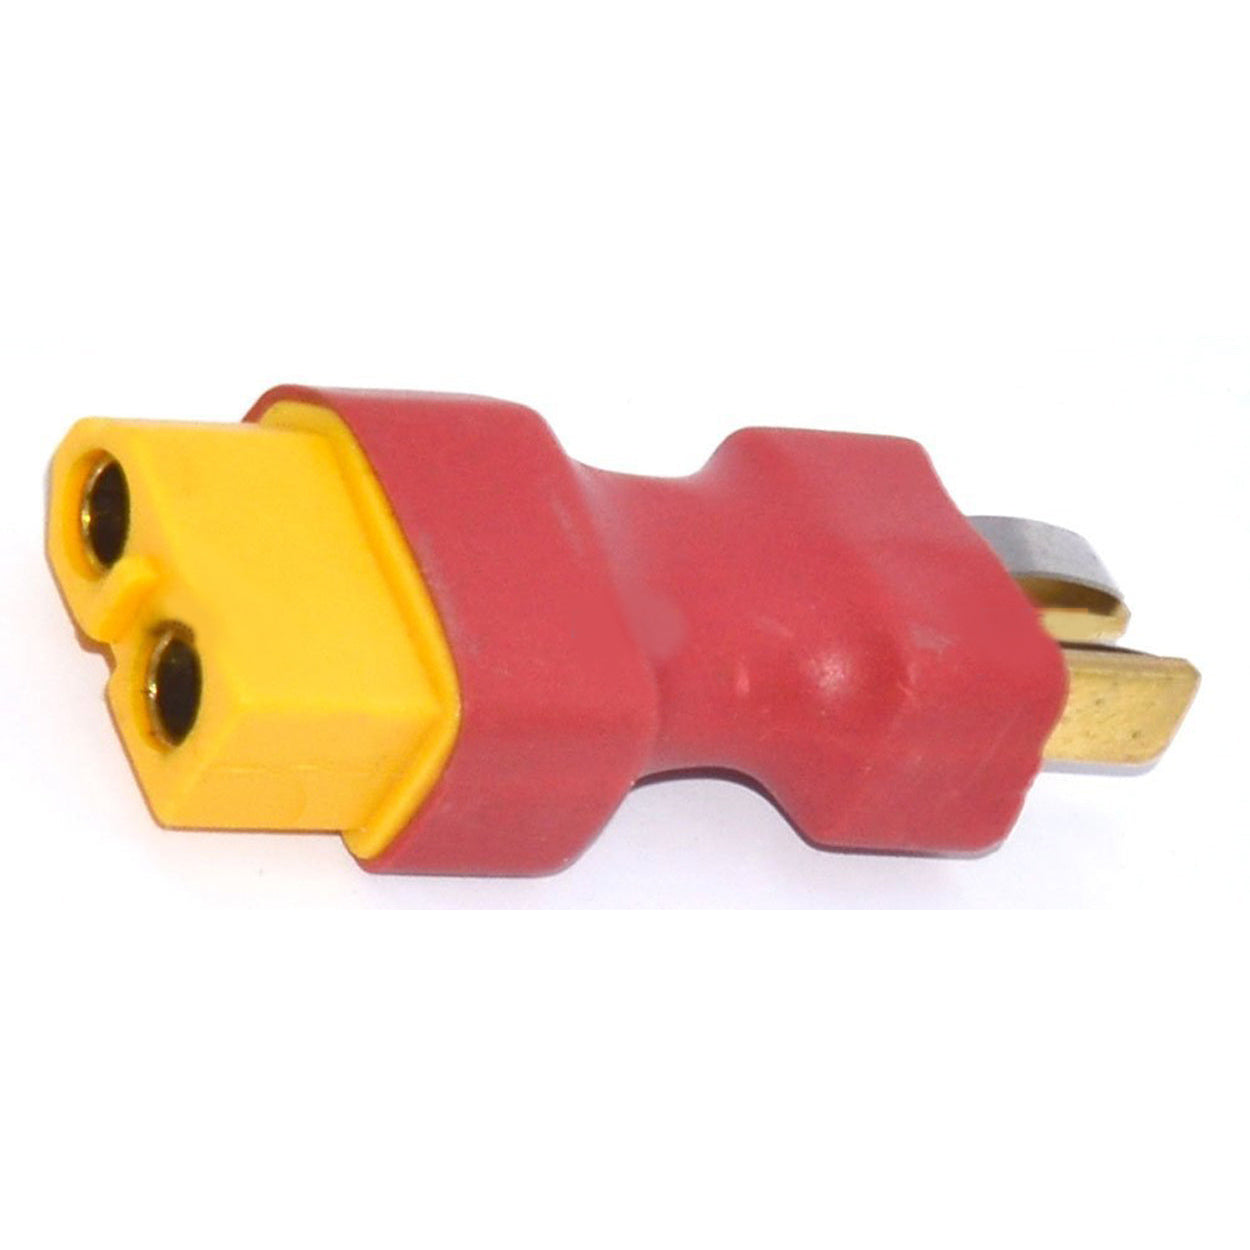 Wireless Deans T-Plug Male connector to XT60 Female Connector Adapter - TT-018